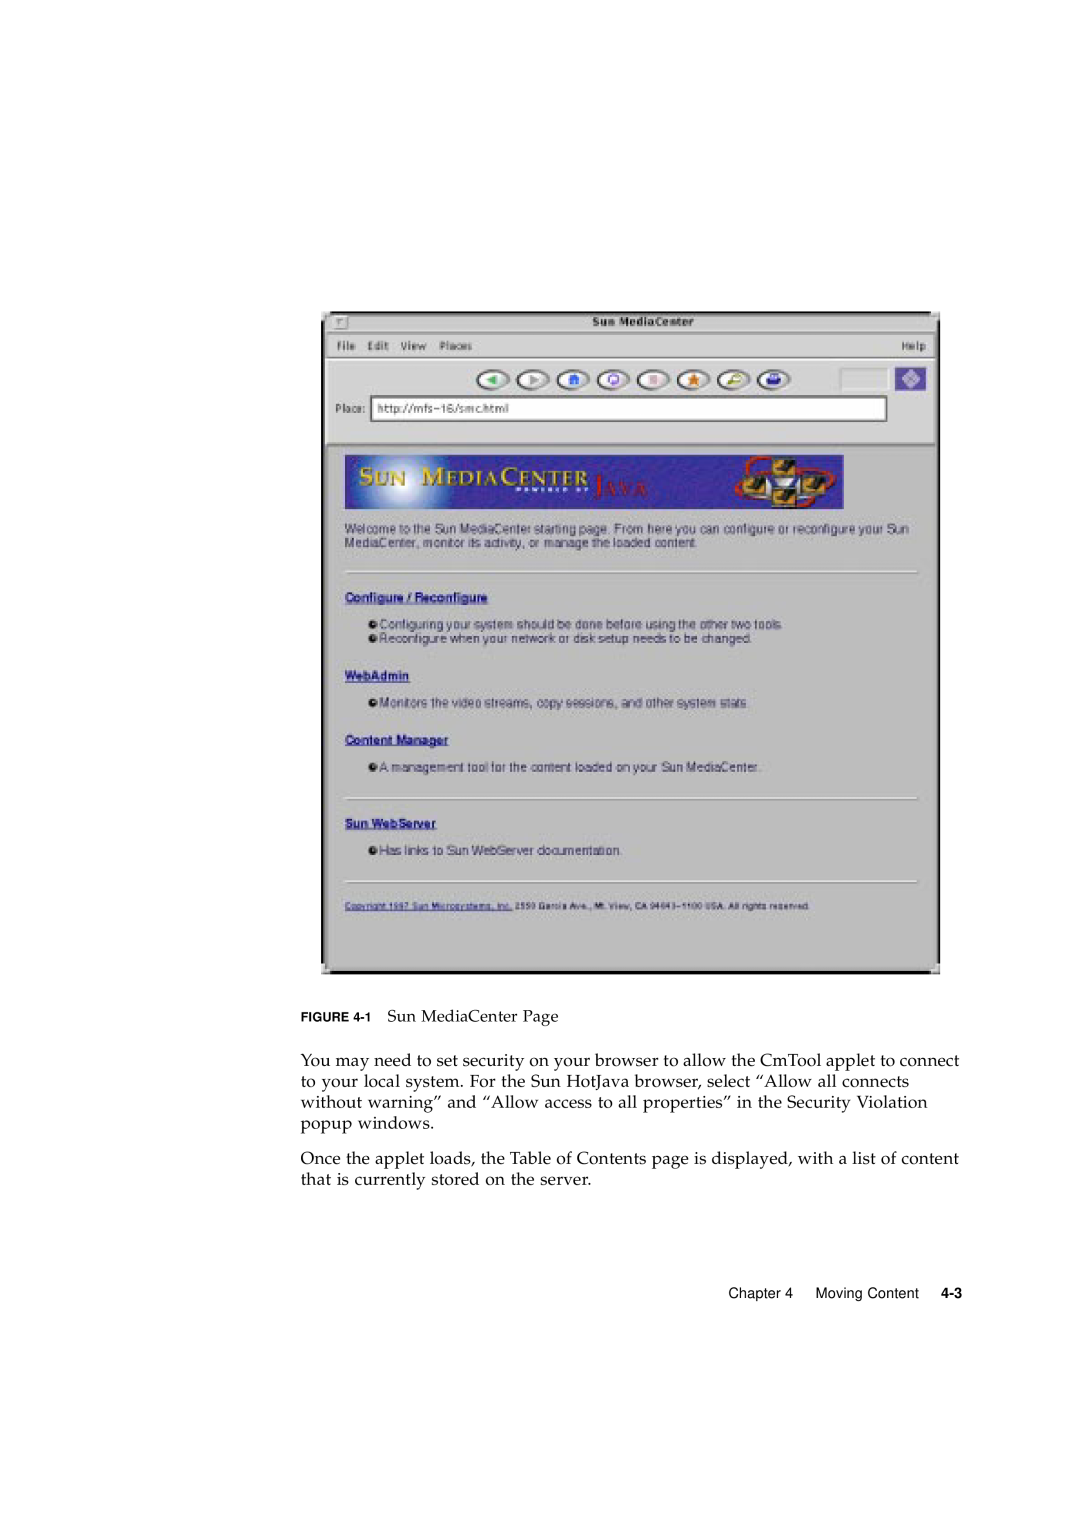 Sun Microsystems 2.1 manual 1 Sun MediaCenter Page, Moving Content 